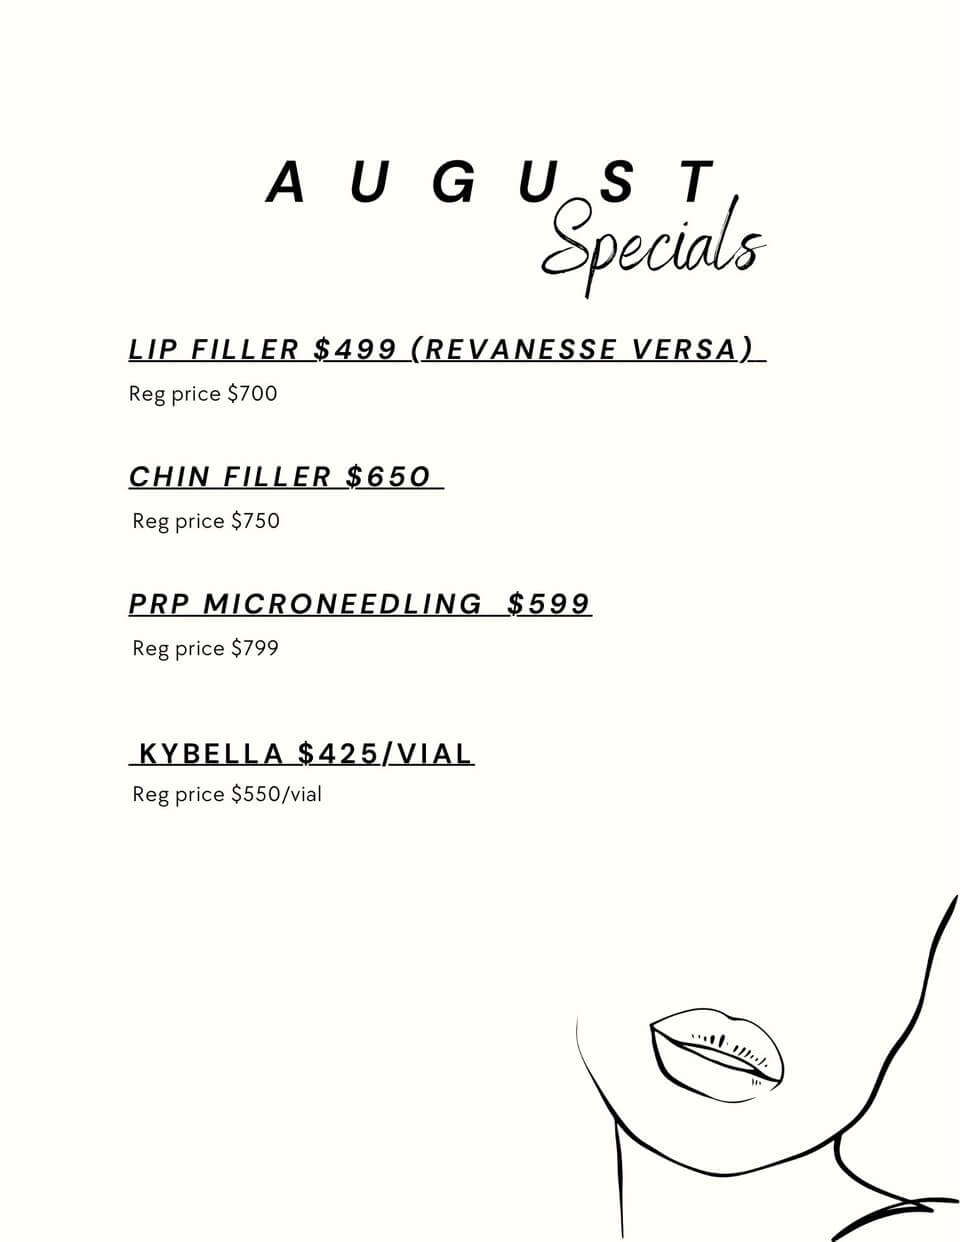 August Specials - SkinFX Medical Spa